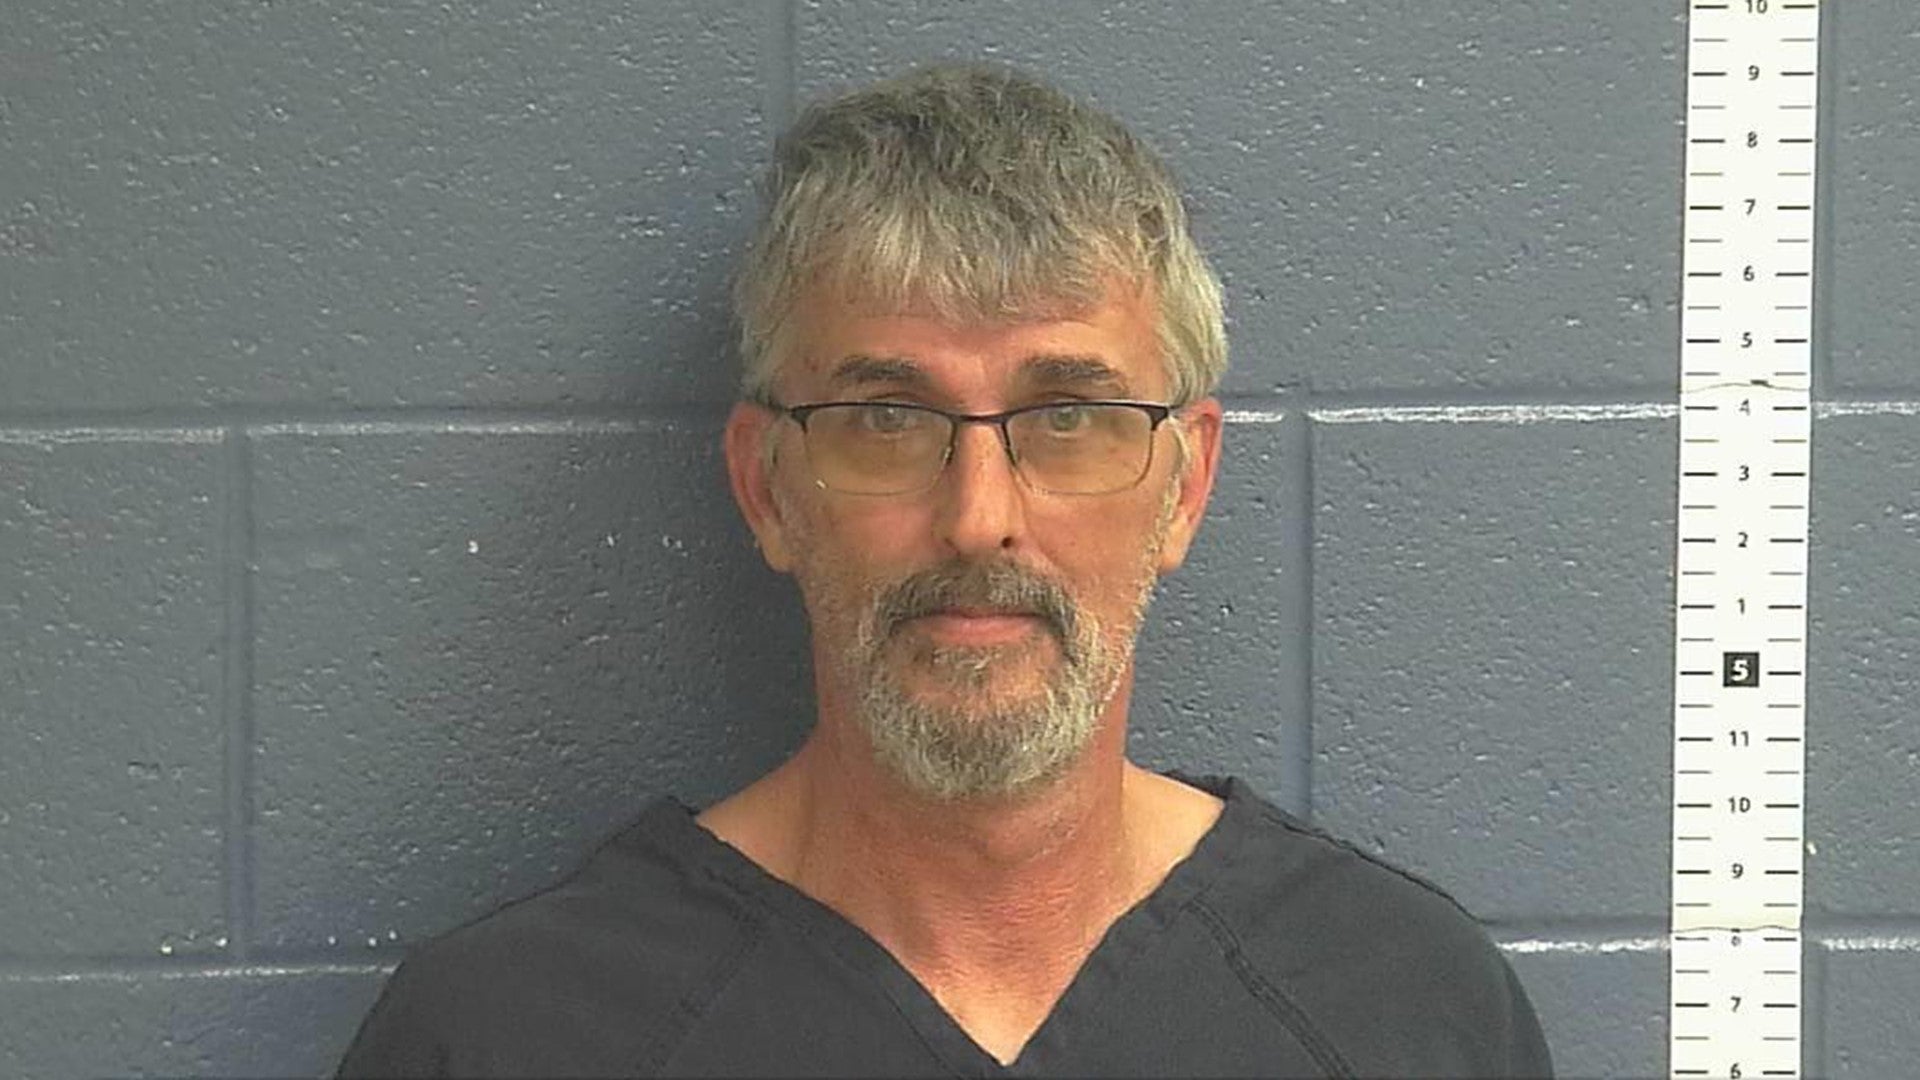 Steve Lawson has been indicted on charges of criminal conspiracy to commit murder and tampering with physical evidence in Crystal Rogers’ case